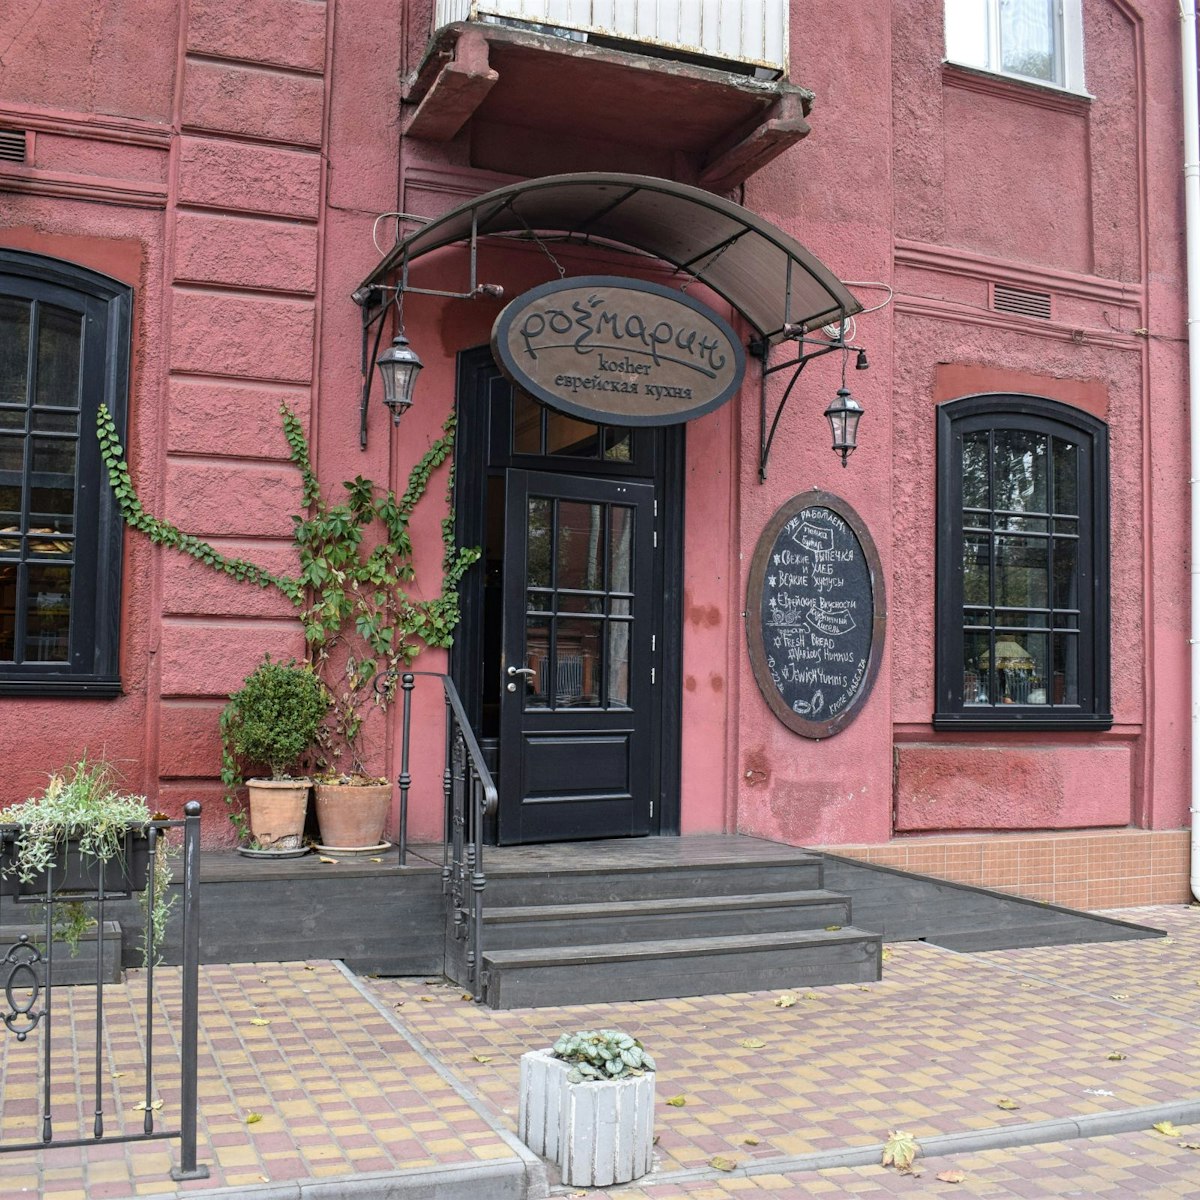 The entrance to Rozmarin, a Jewish restaurant in Odesa